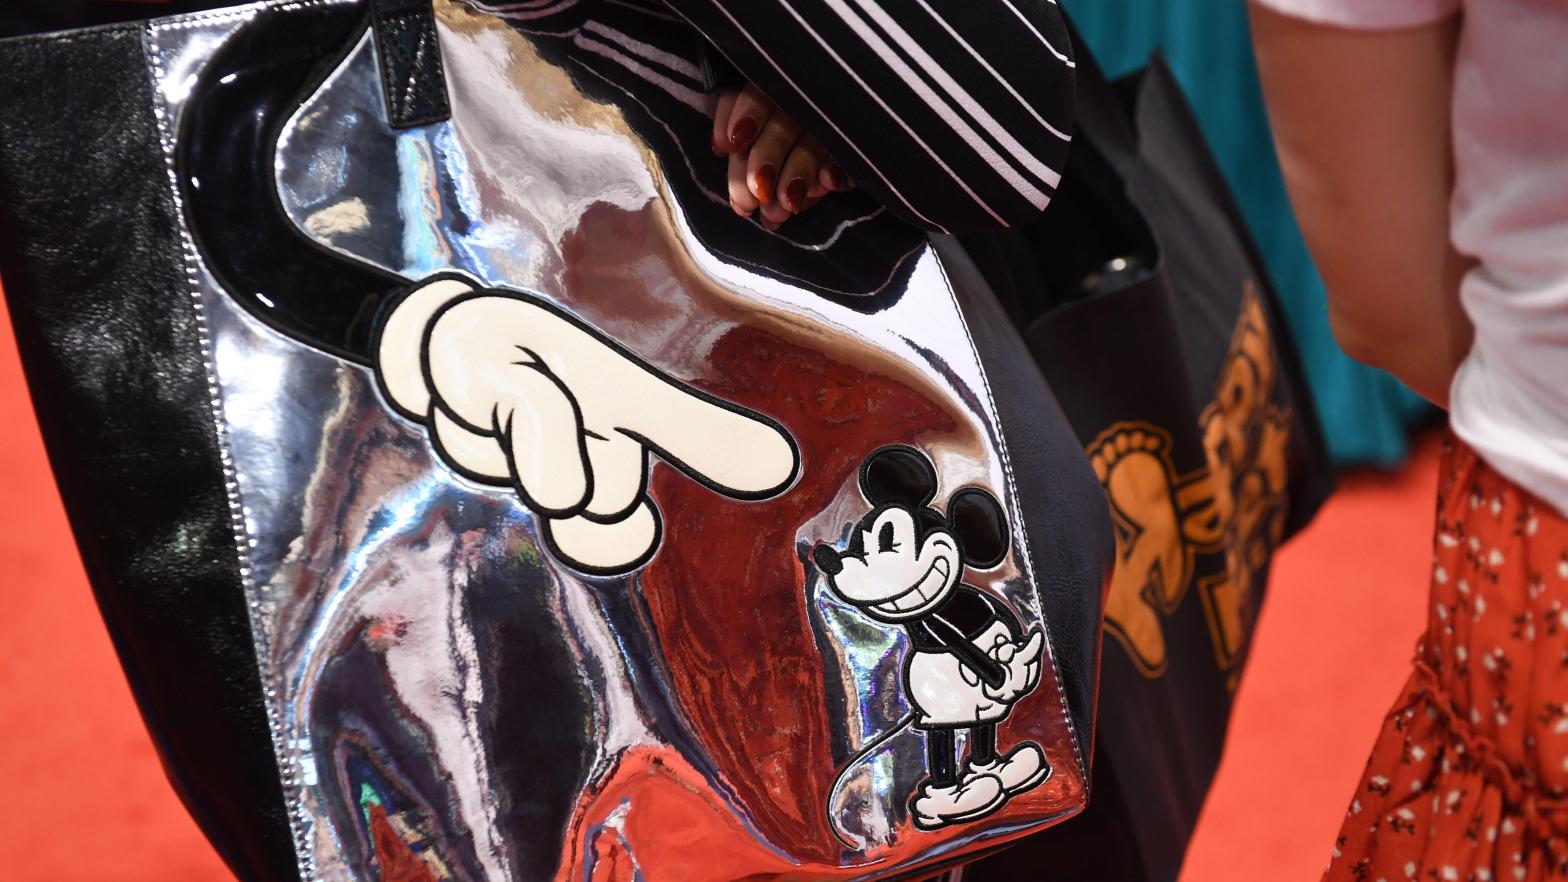 A bag shown at the 2019 D23 Expo, which is accessible by members of the official D23 Fan Club. (Photo: ROBYN BECK/AFP, Getty Images)